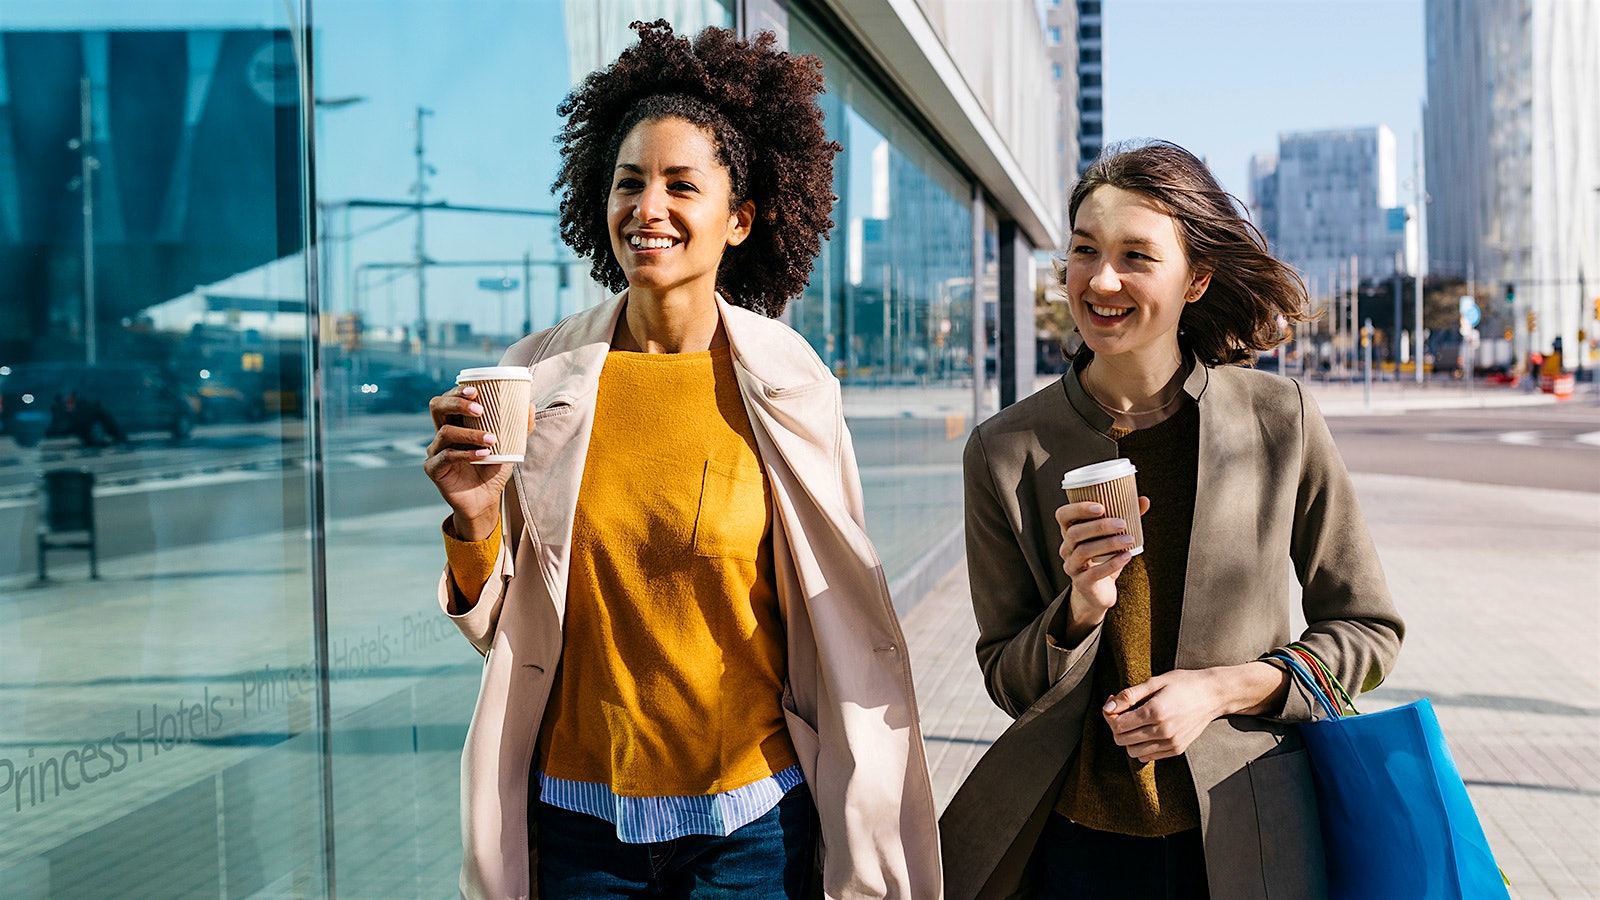  Two women drinking coffee while walking in a city